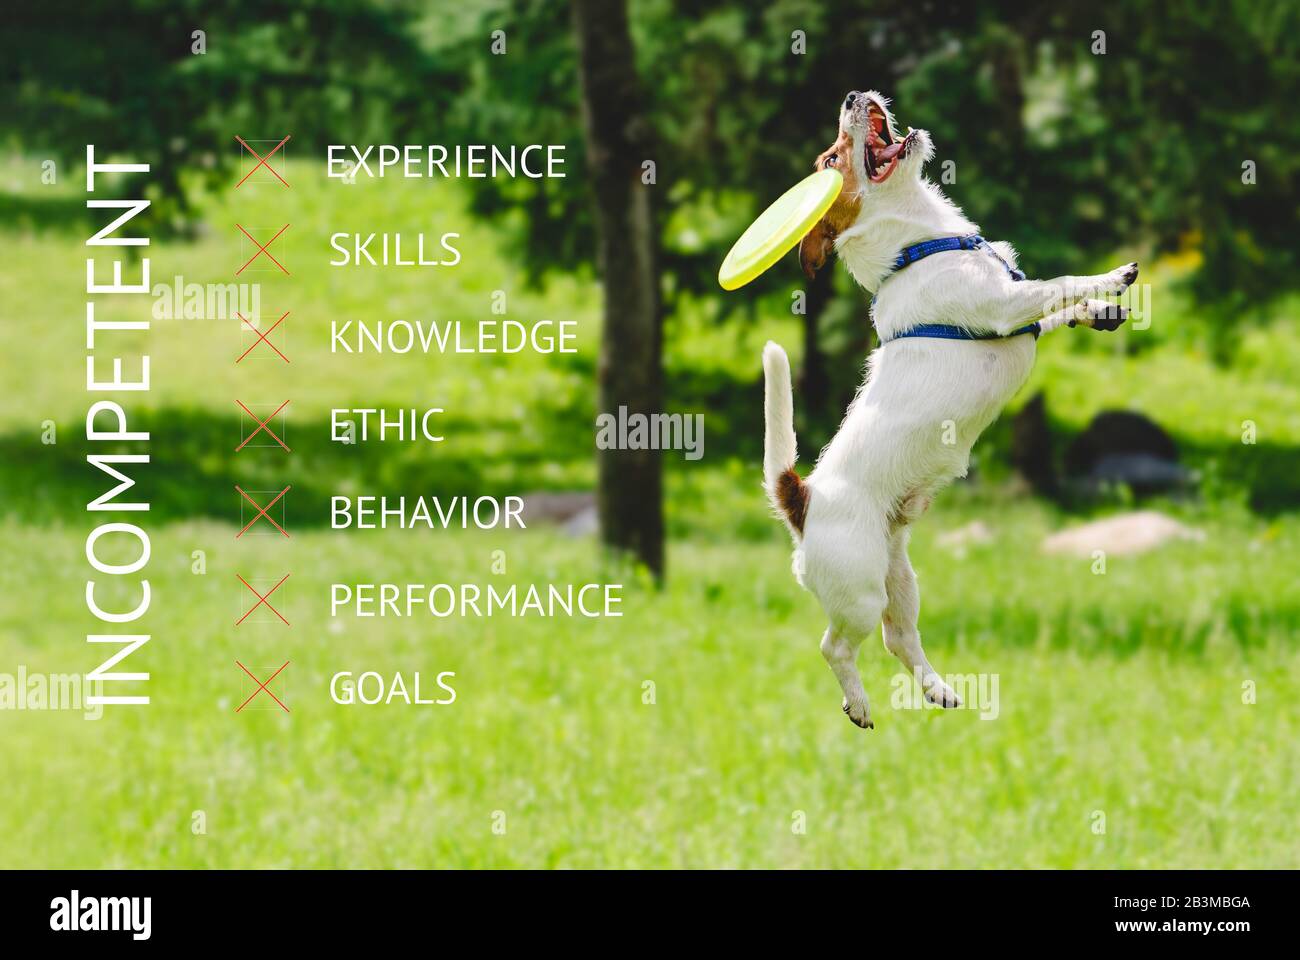 Humorous business concept about incompetence with dog failing to catch flying disk in jump Stock Photo